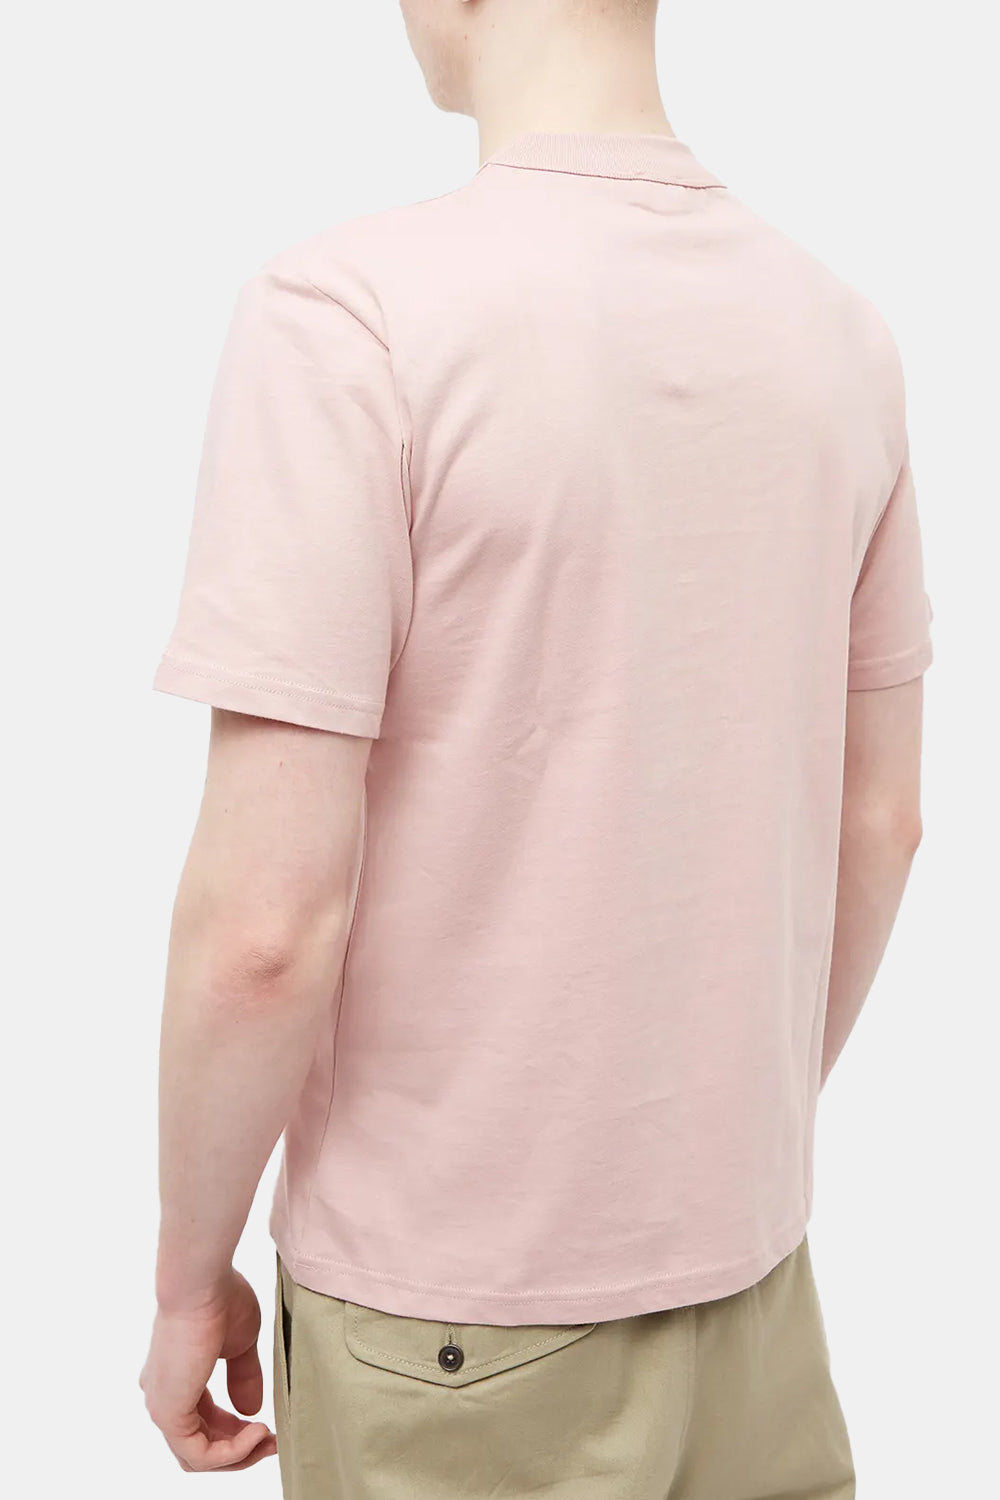 Armor Lux Heritage Pocket T-Shirt (Antic Pink)